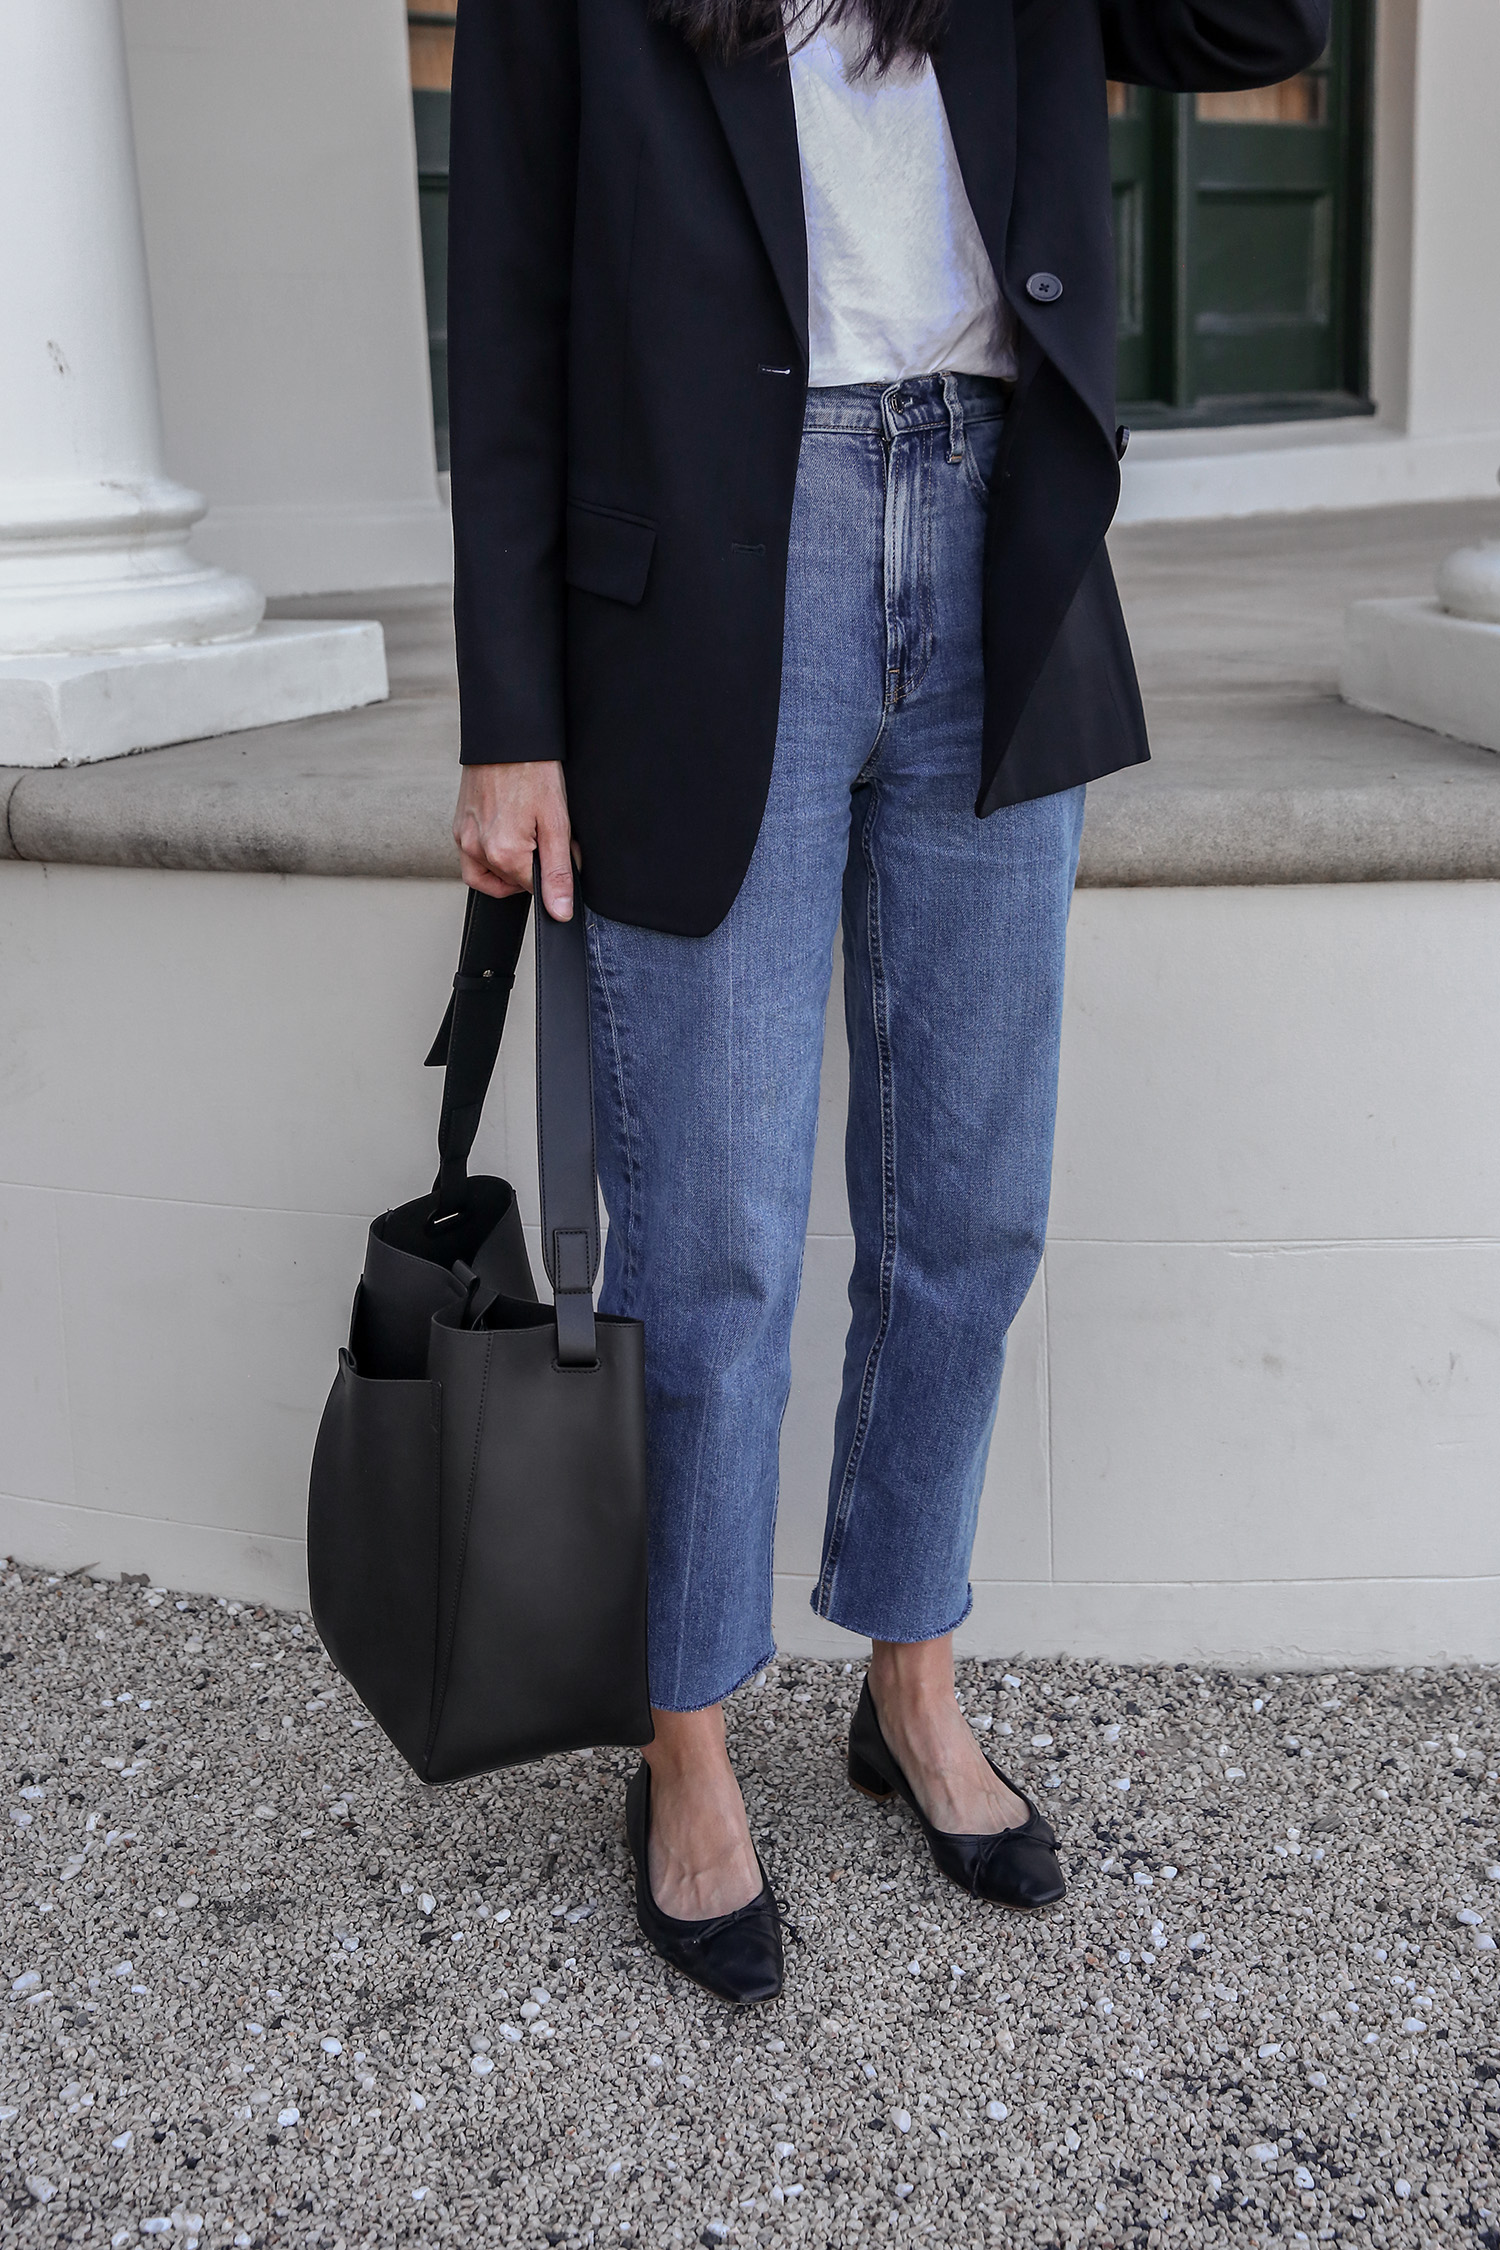 Everlane transitional season outfit style